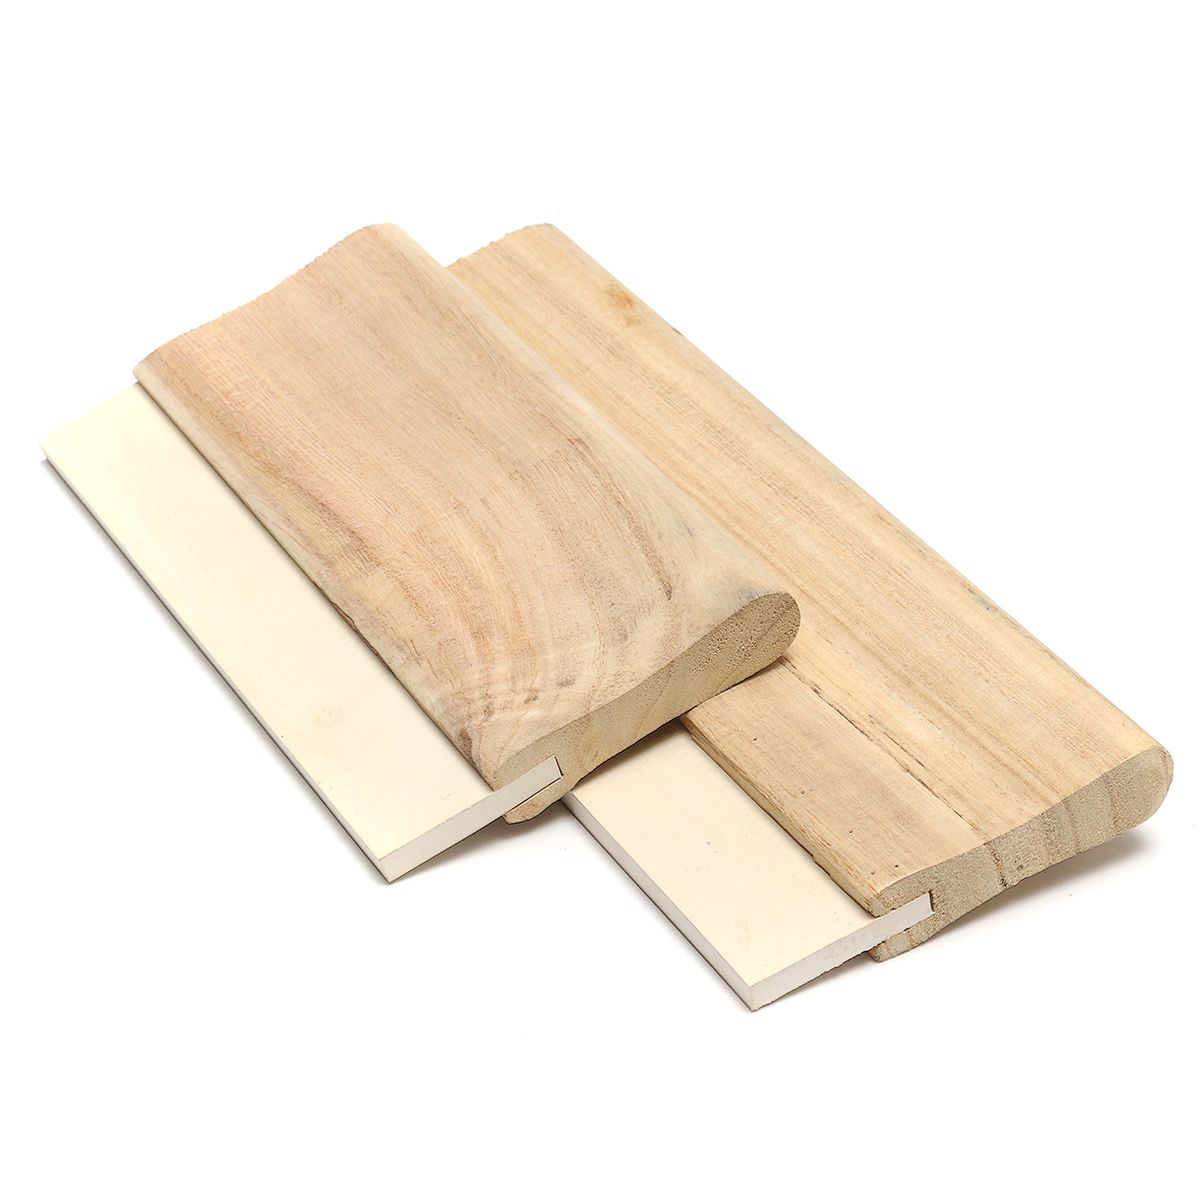 2-Sizes-A4A3-Wooden-Handle-Rubber-Blade-for-Screen-Printing-Squeegee-1113705